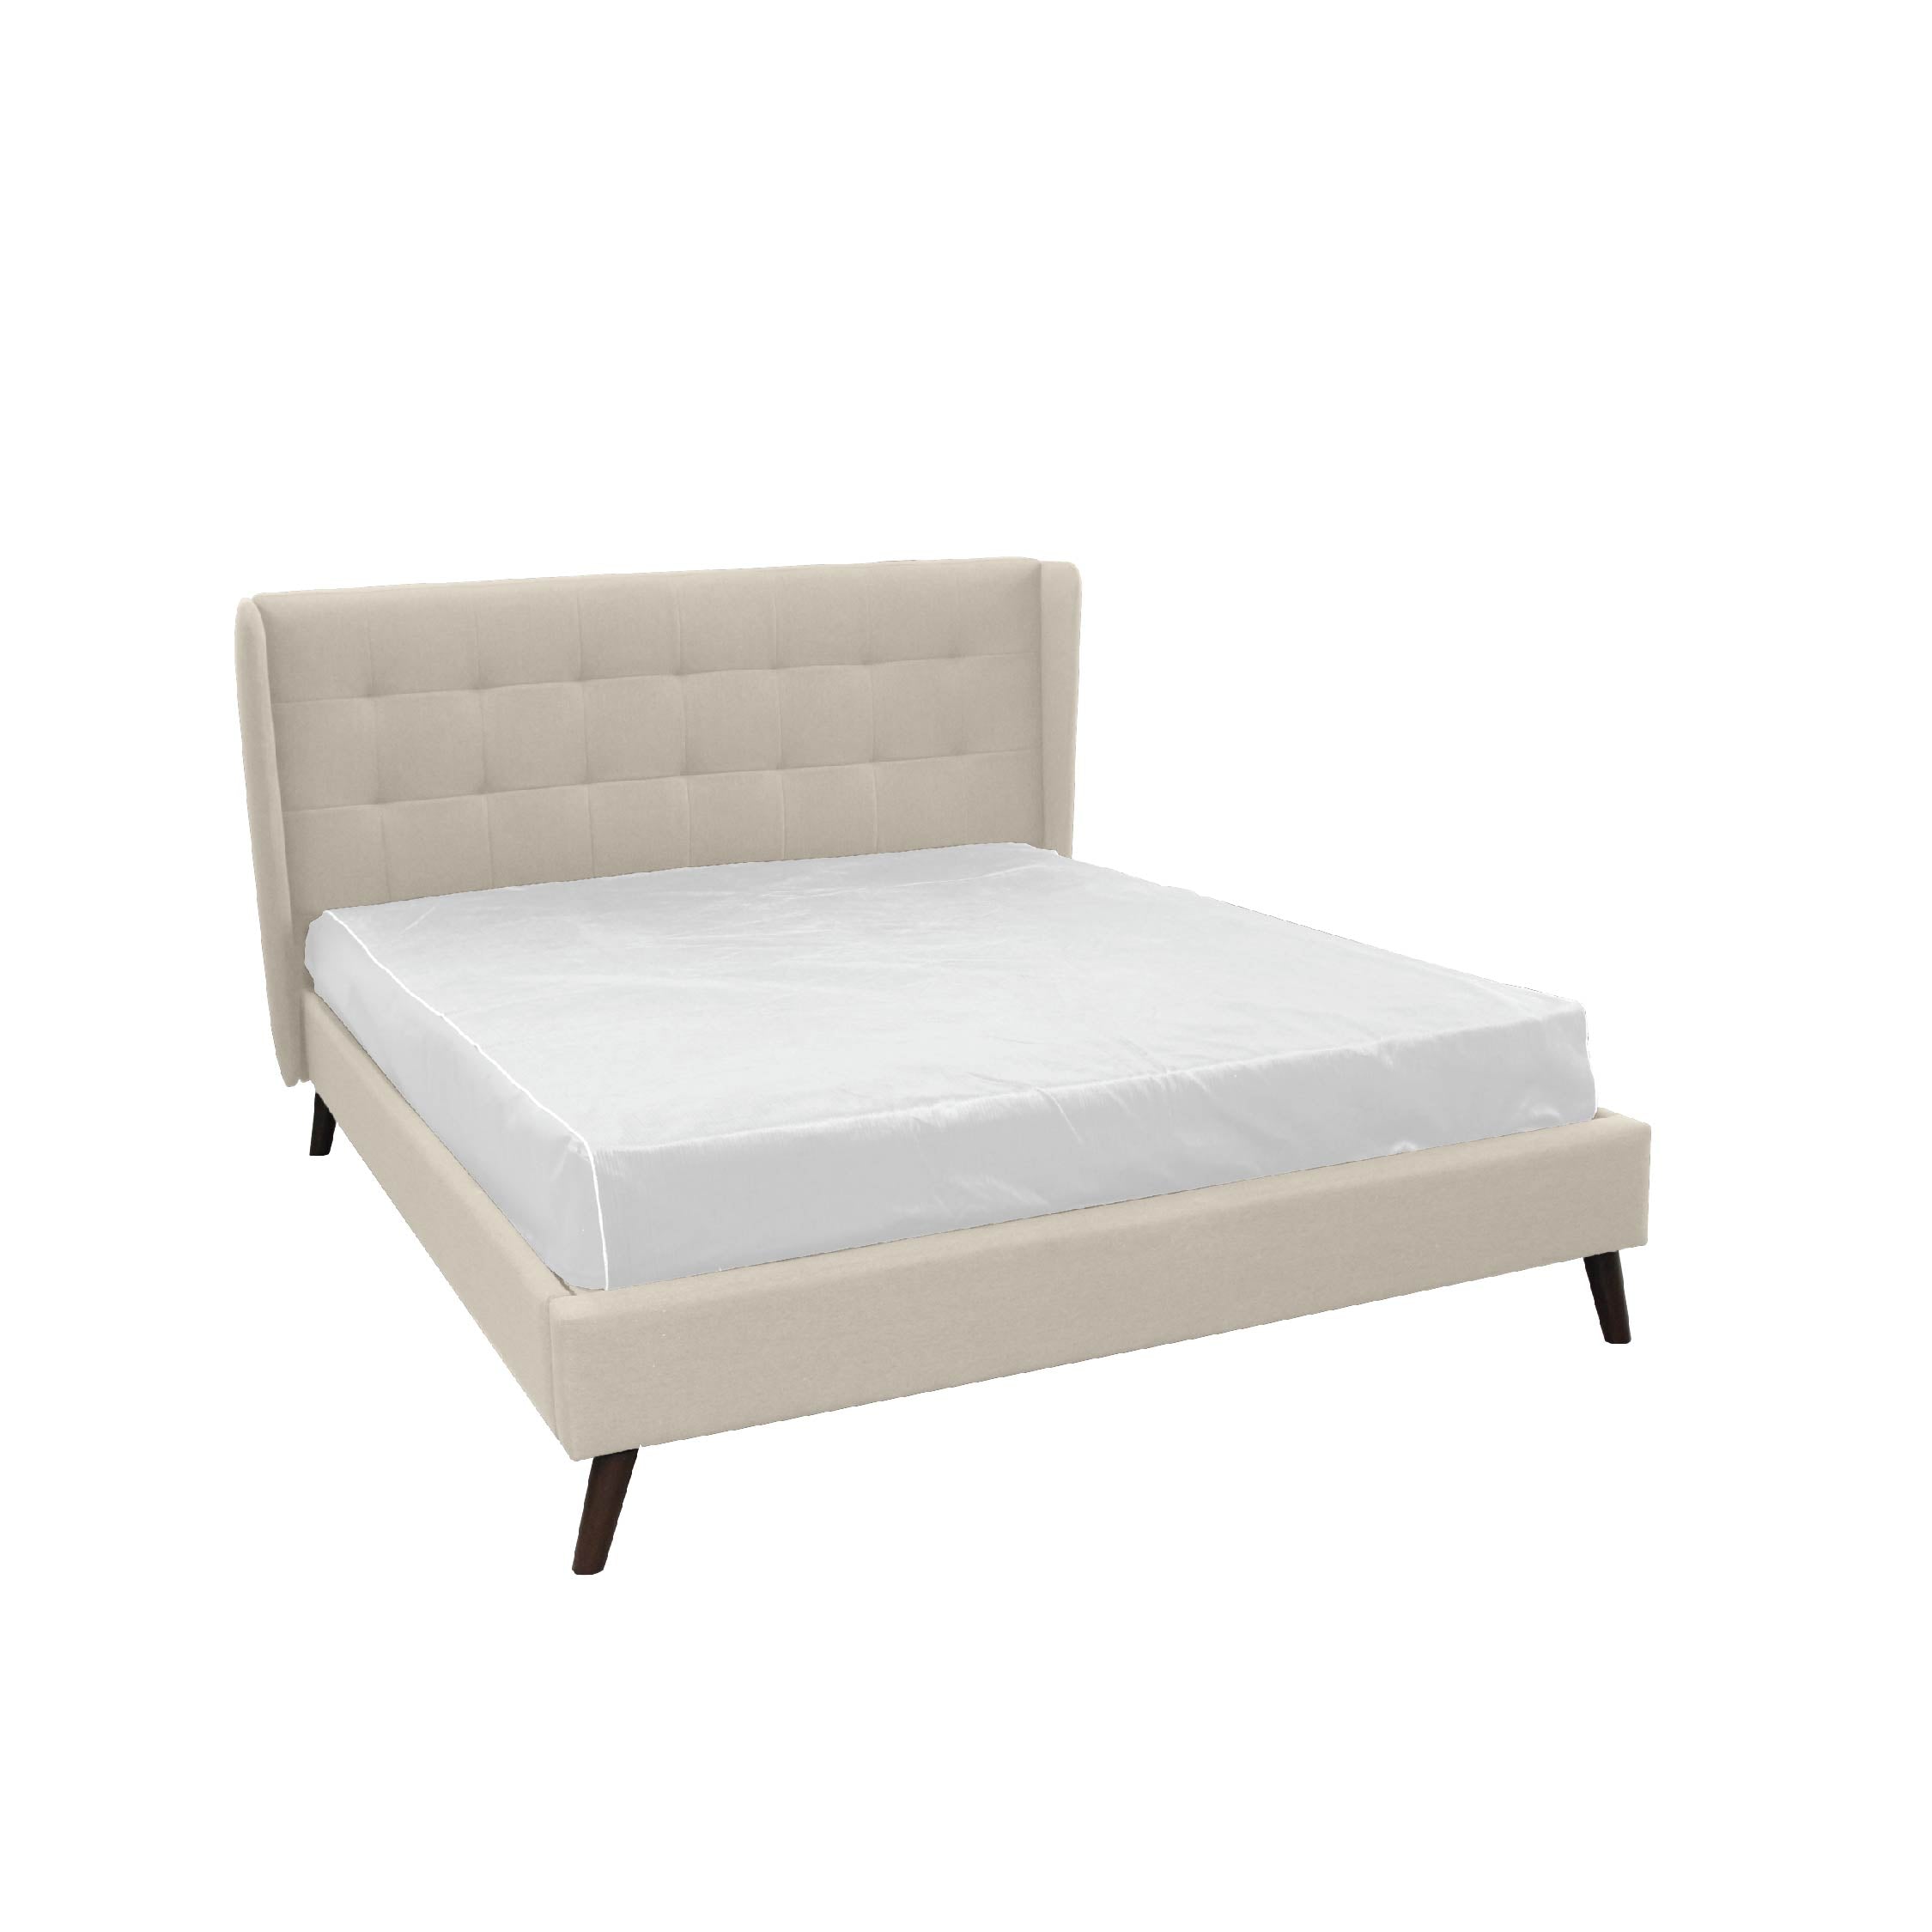 LATAR Wing Bed Frame Queen